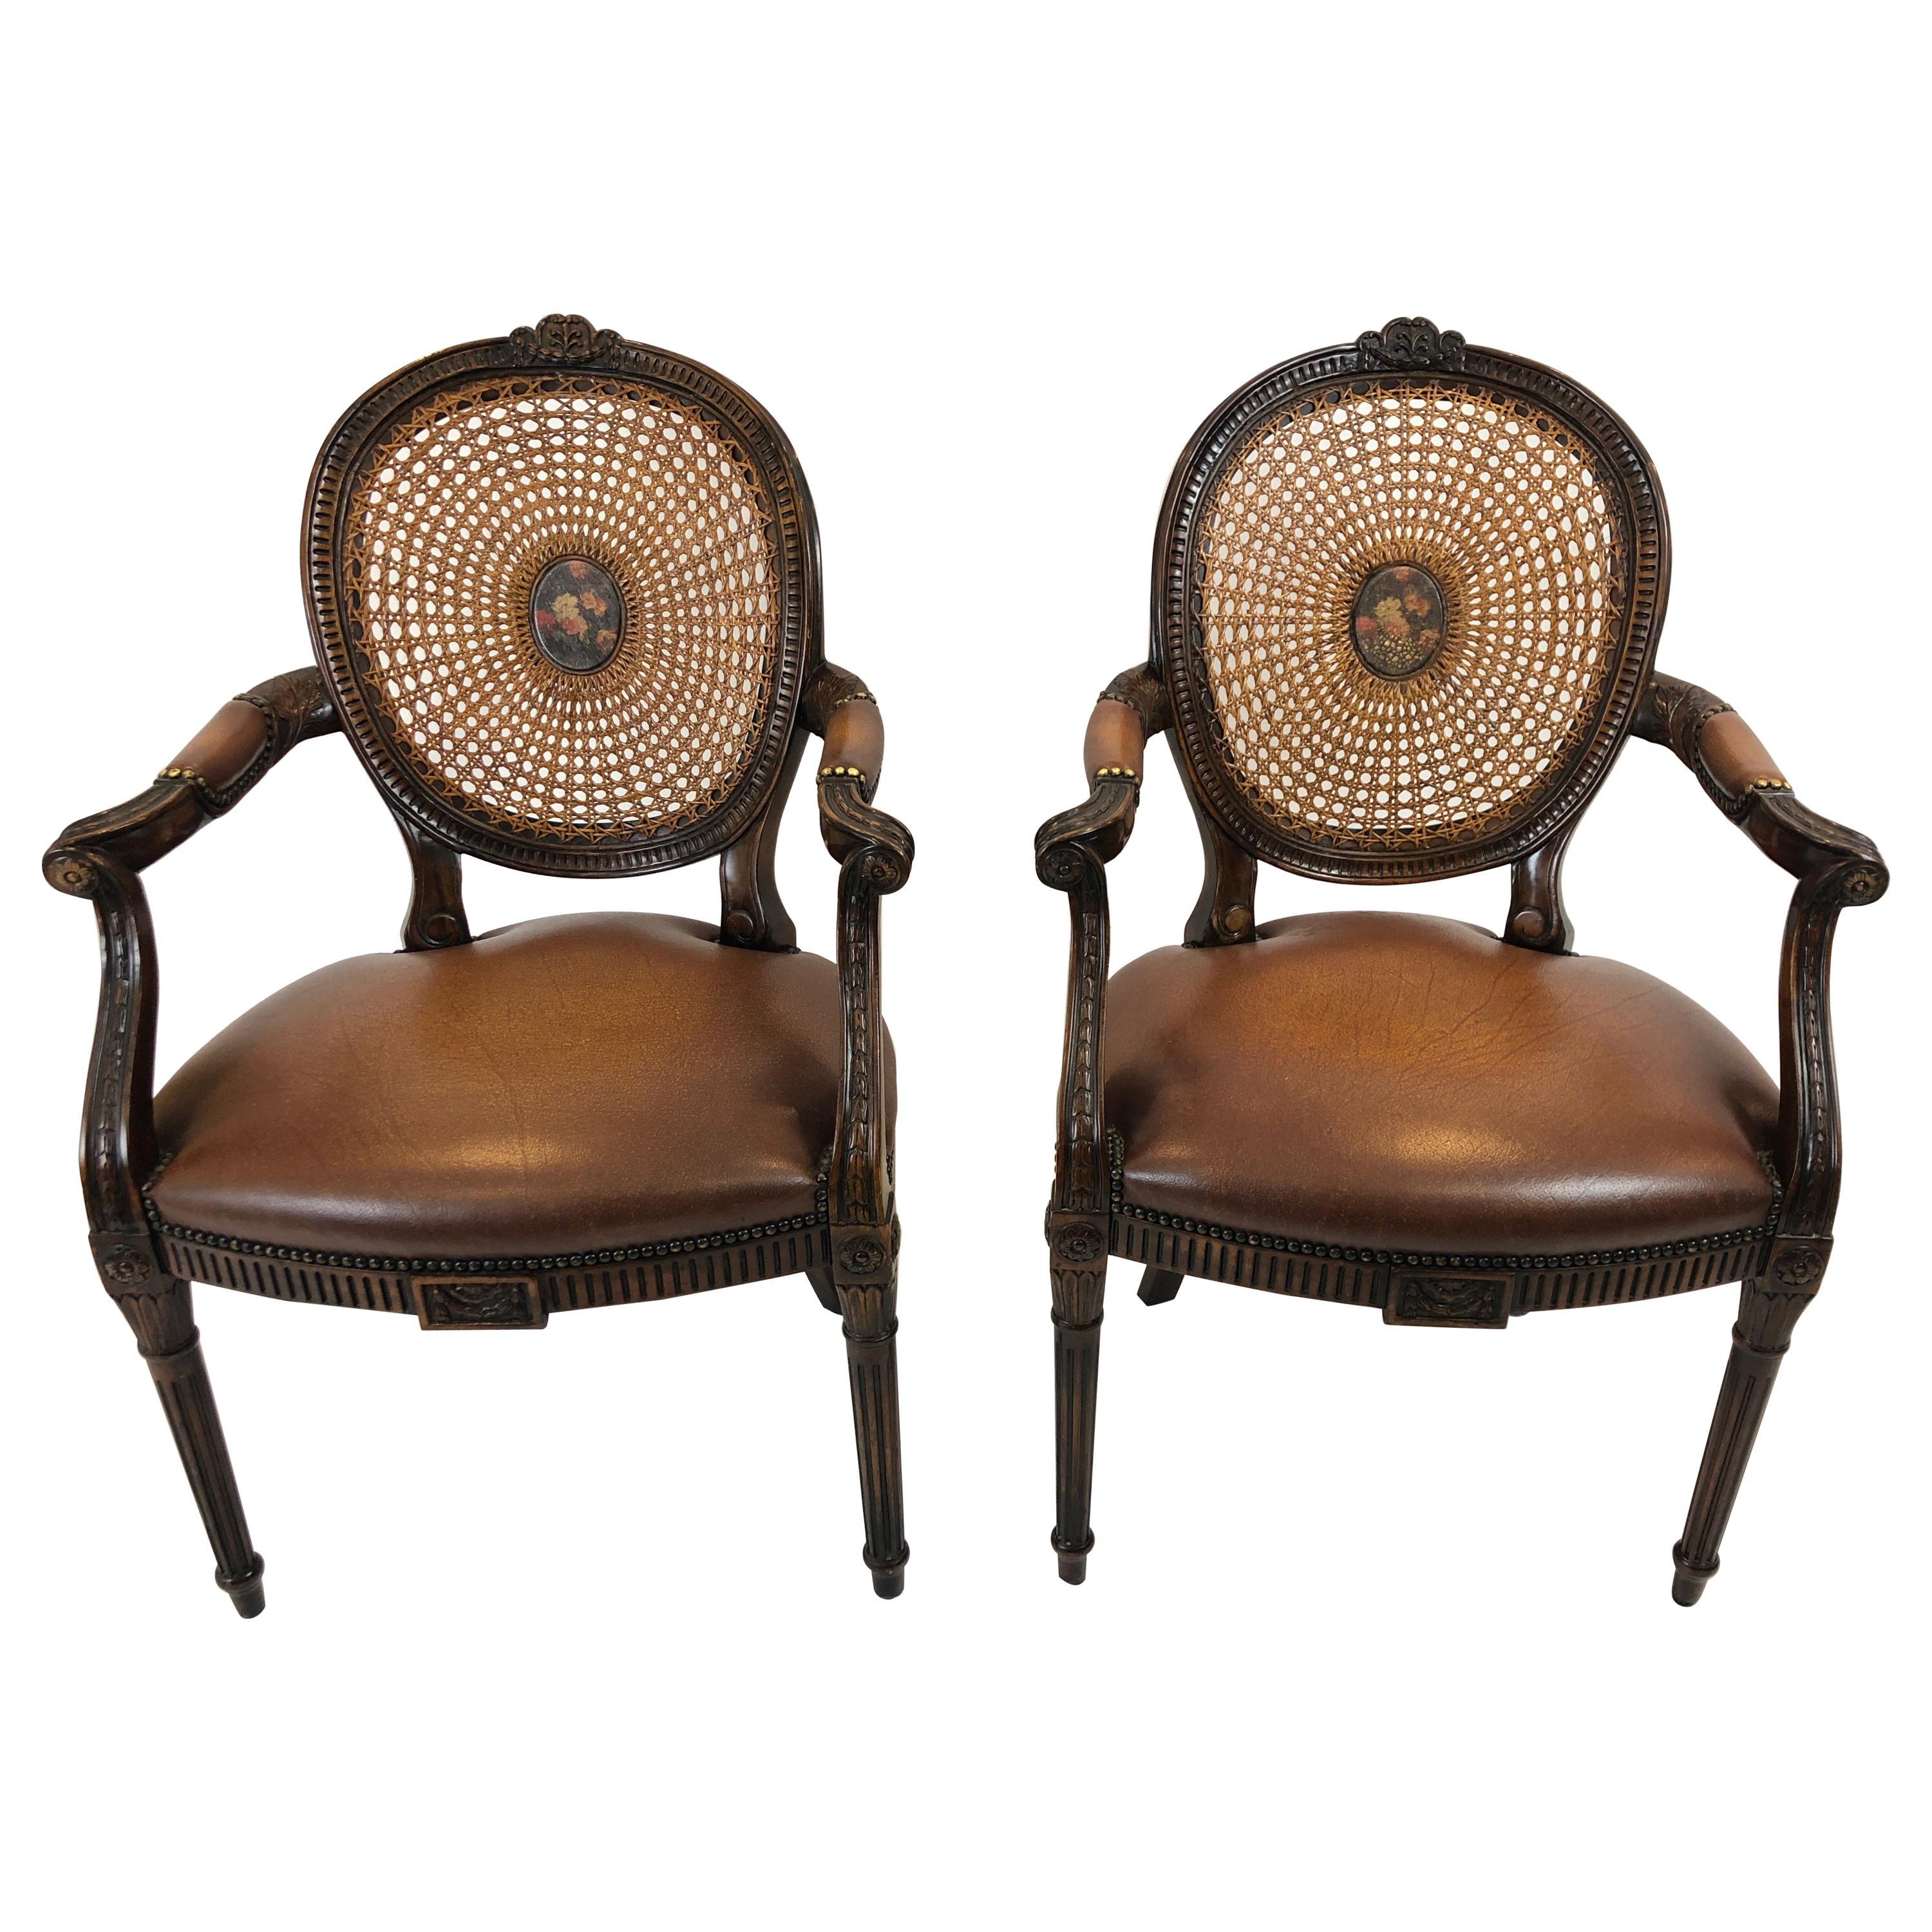 Theodore Alexander Grand Pair of Caned and Cameo Back Armchairs